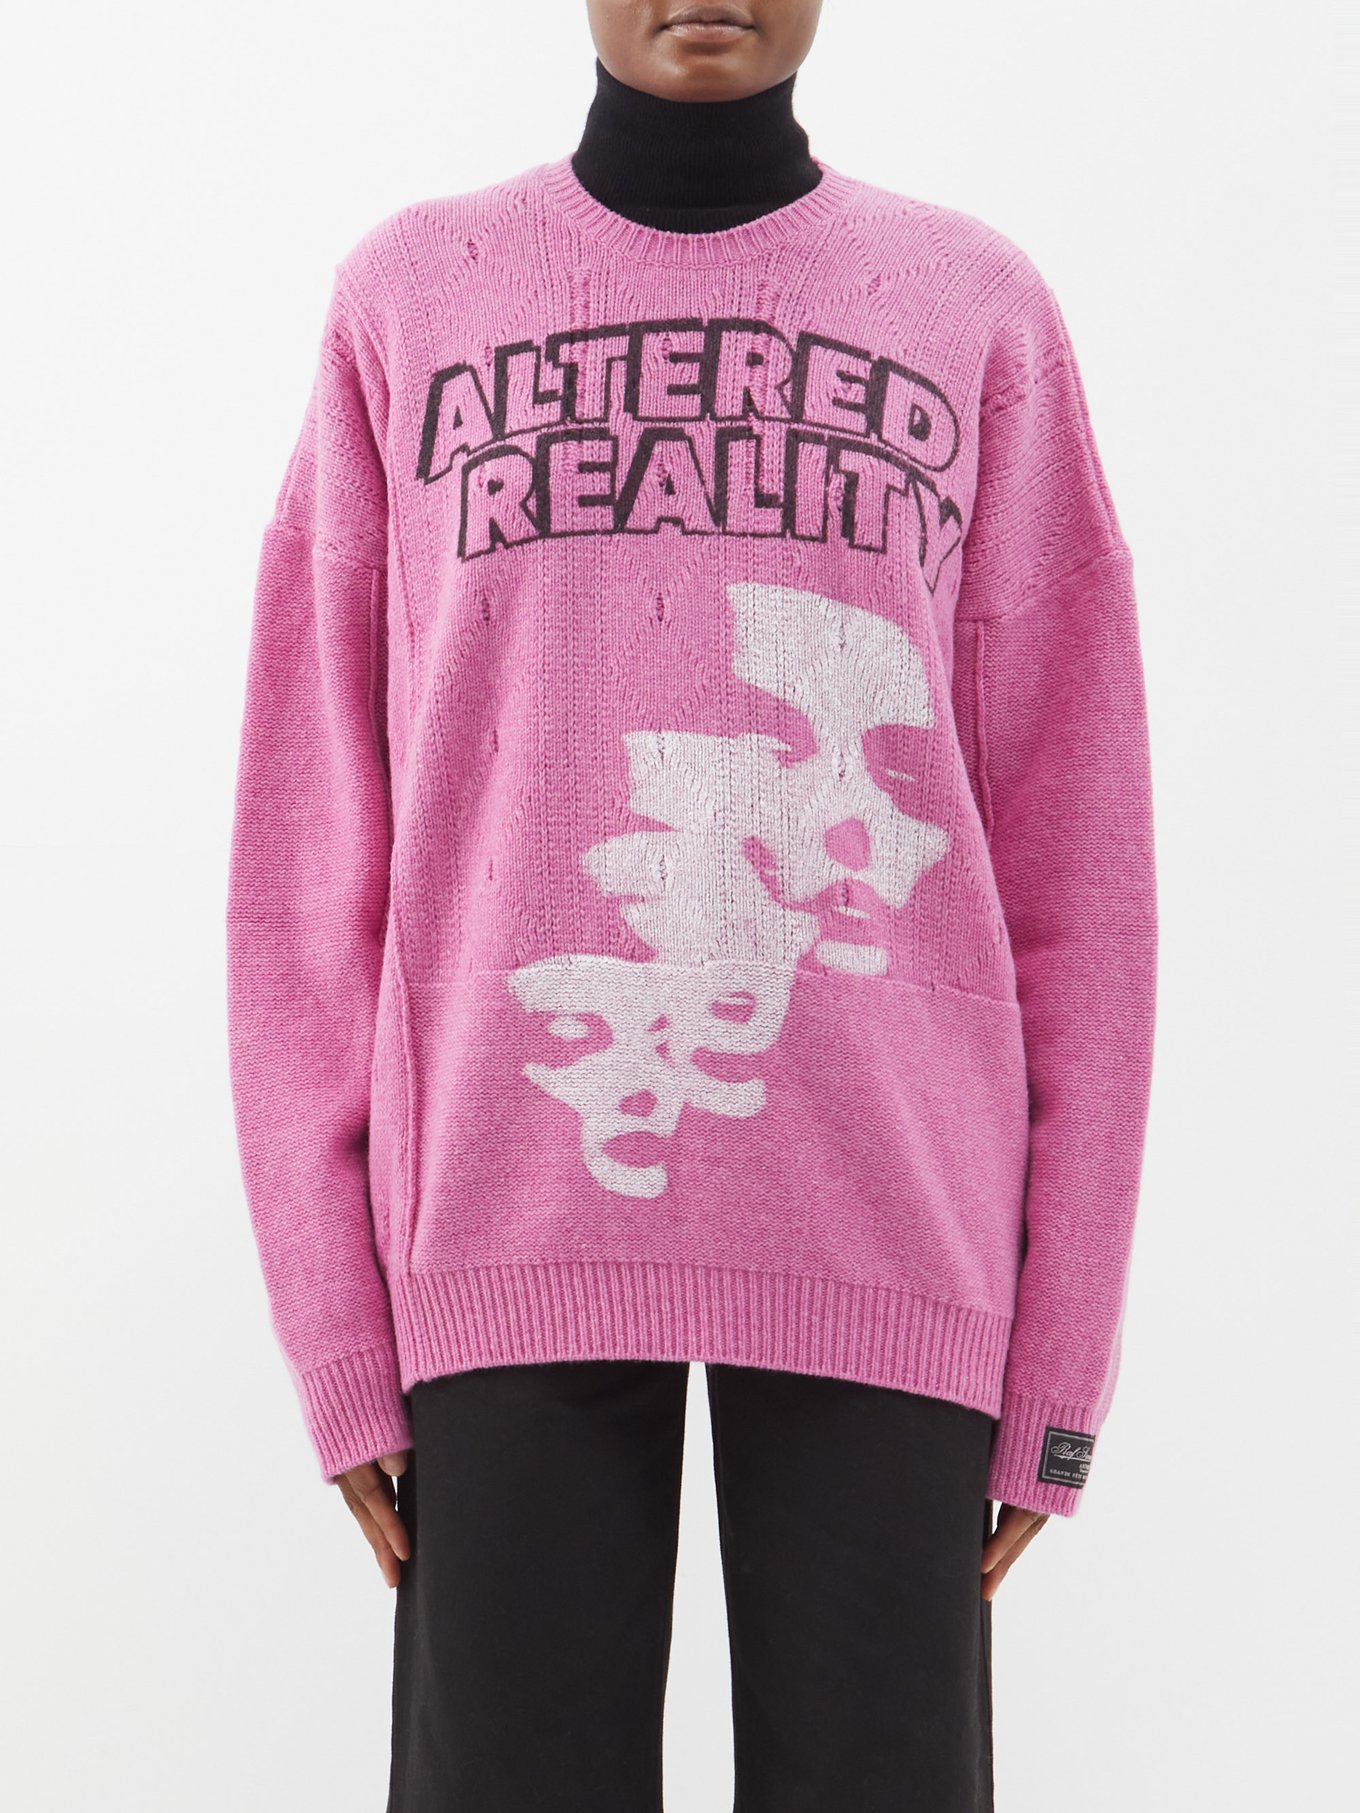 Altered Reality printed wool sweater | Raf Simons